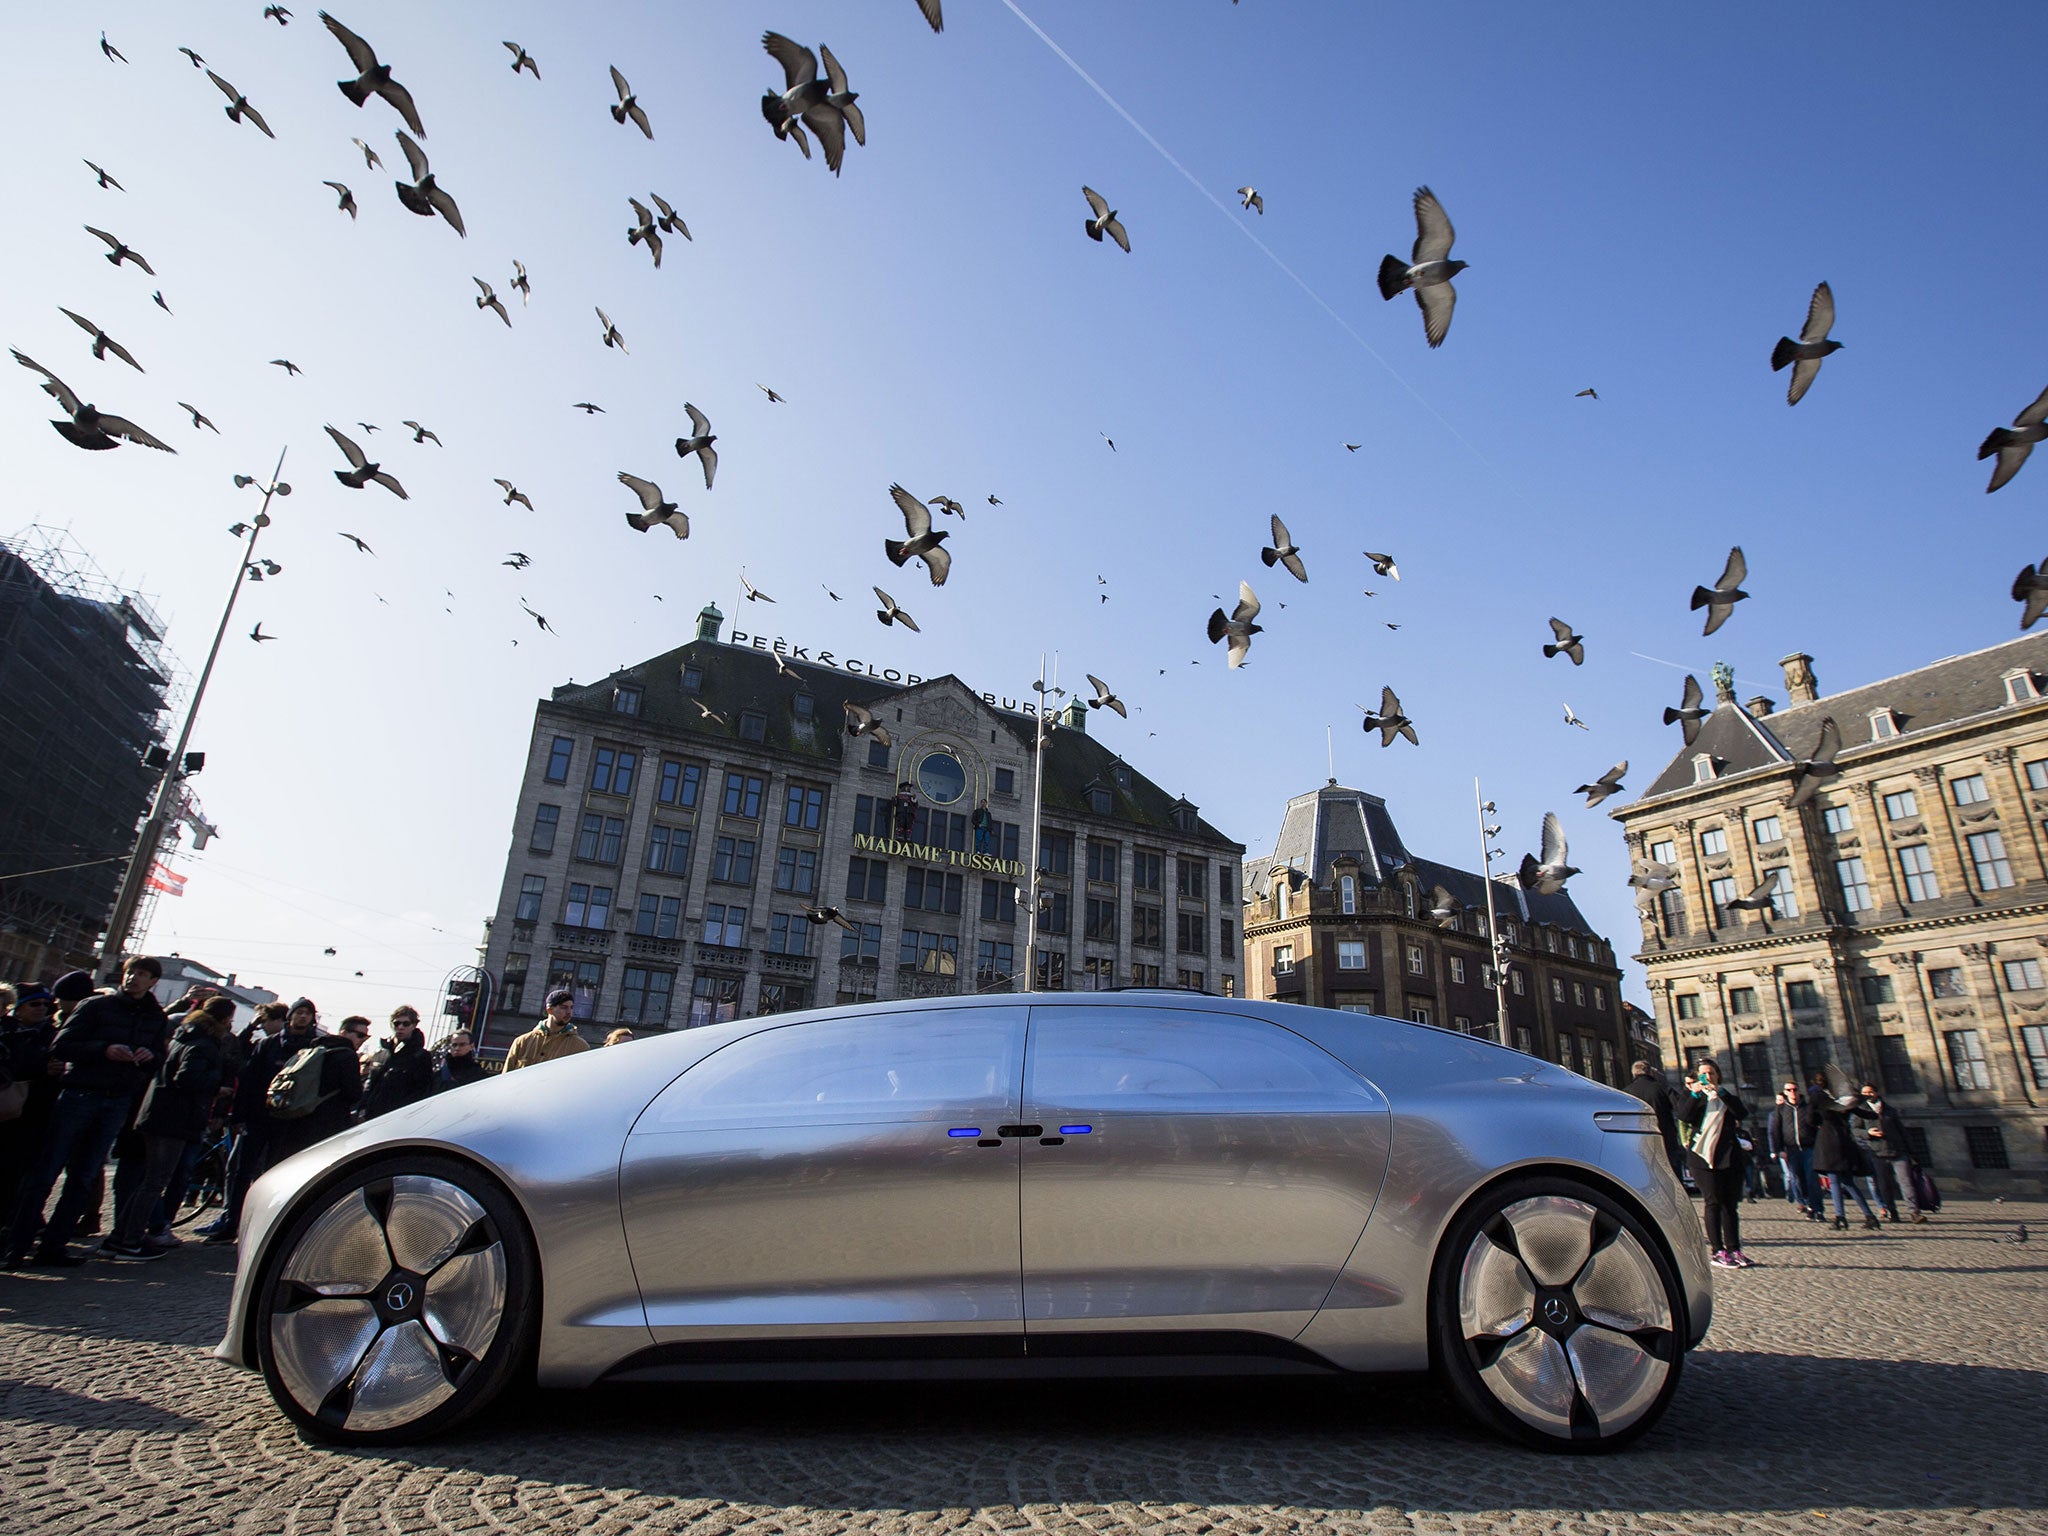 The self-driving Mercedes Benz F 015 in Amsterdam this March